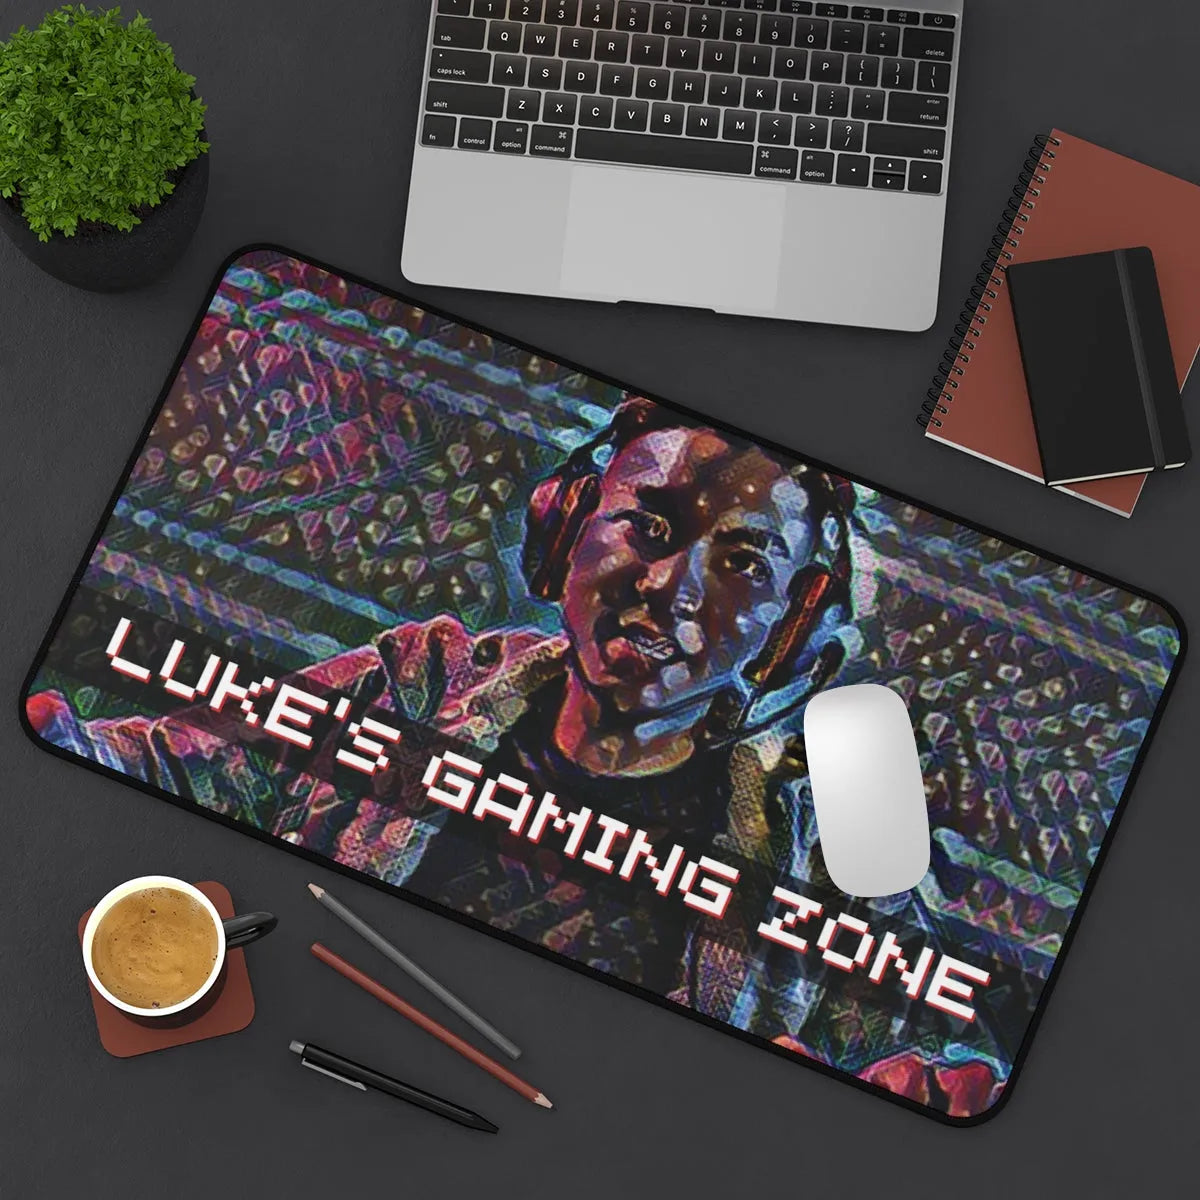 Personalized Gaming Photo Desk Mat -  Level Up Your Gaming Space with Customized Photo Gaming Desk Mat